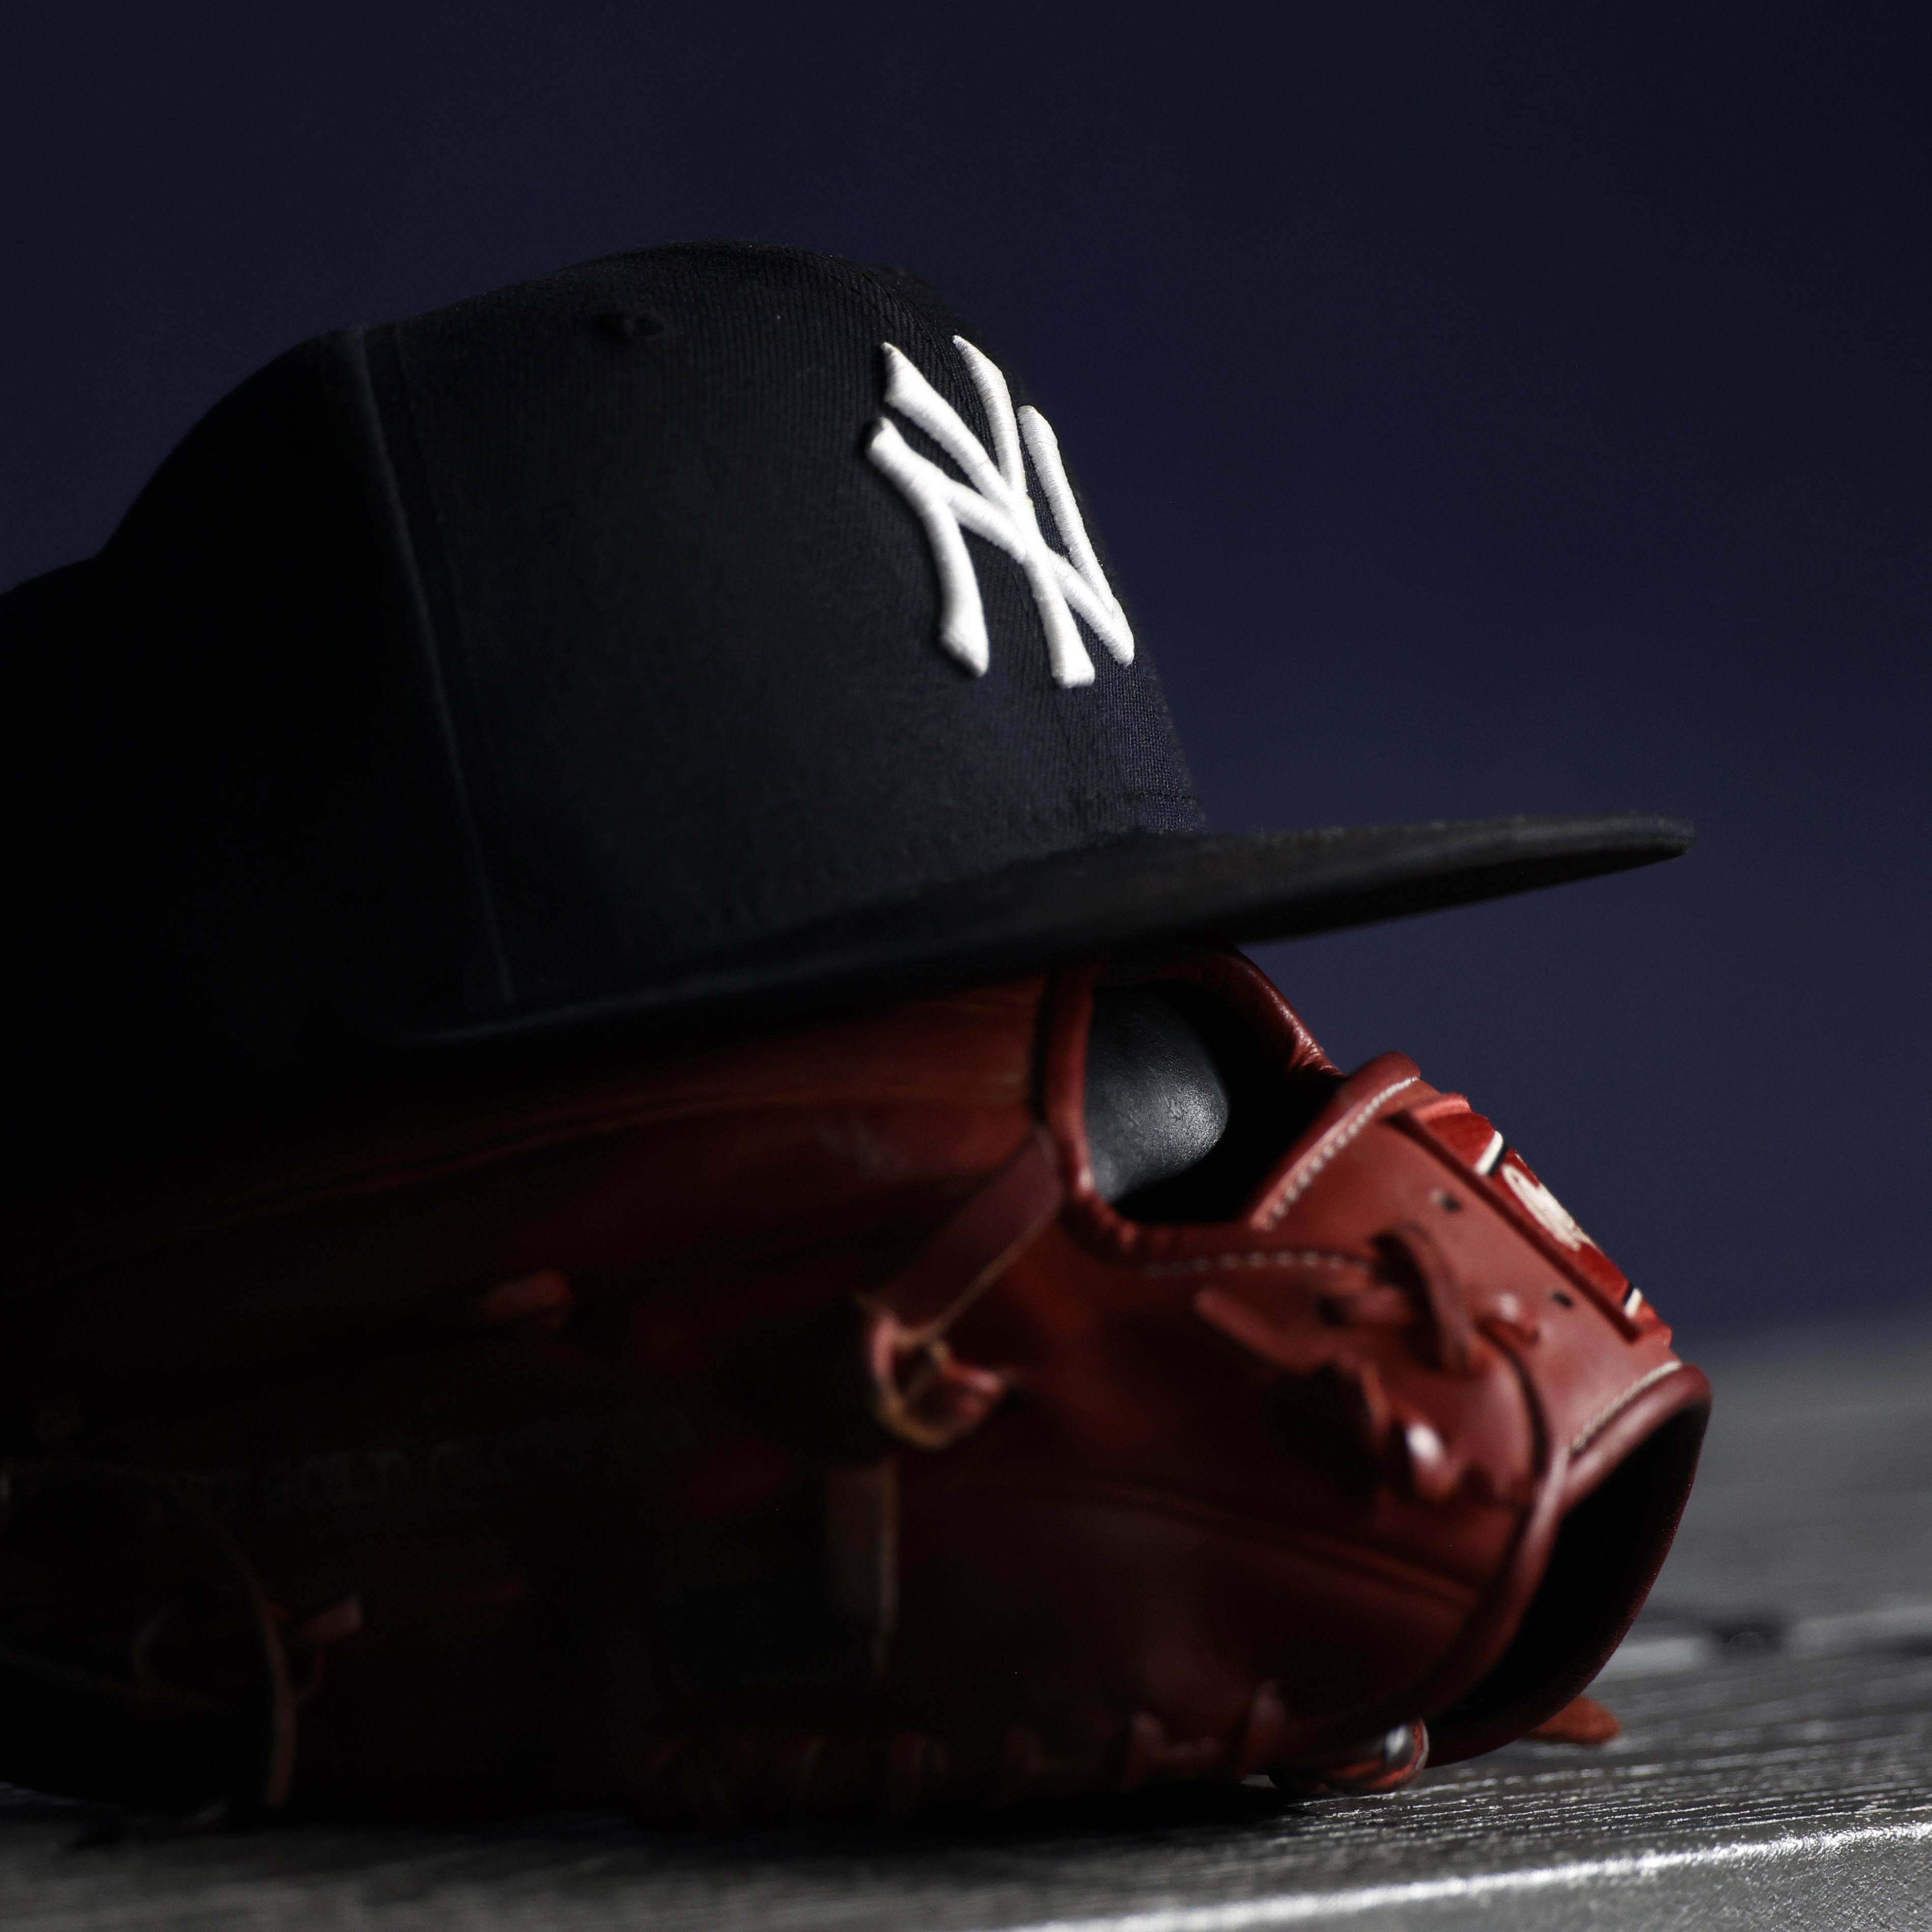 Report: Yankees Cut Jake Sanford for Allegedly Stealing, Selling Teammates' Equi..